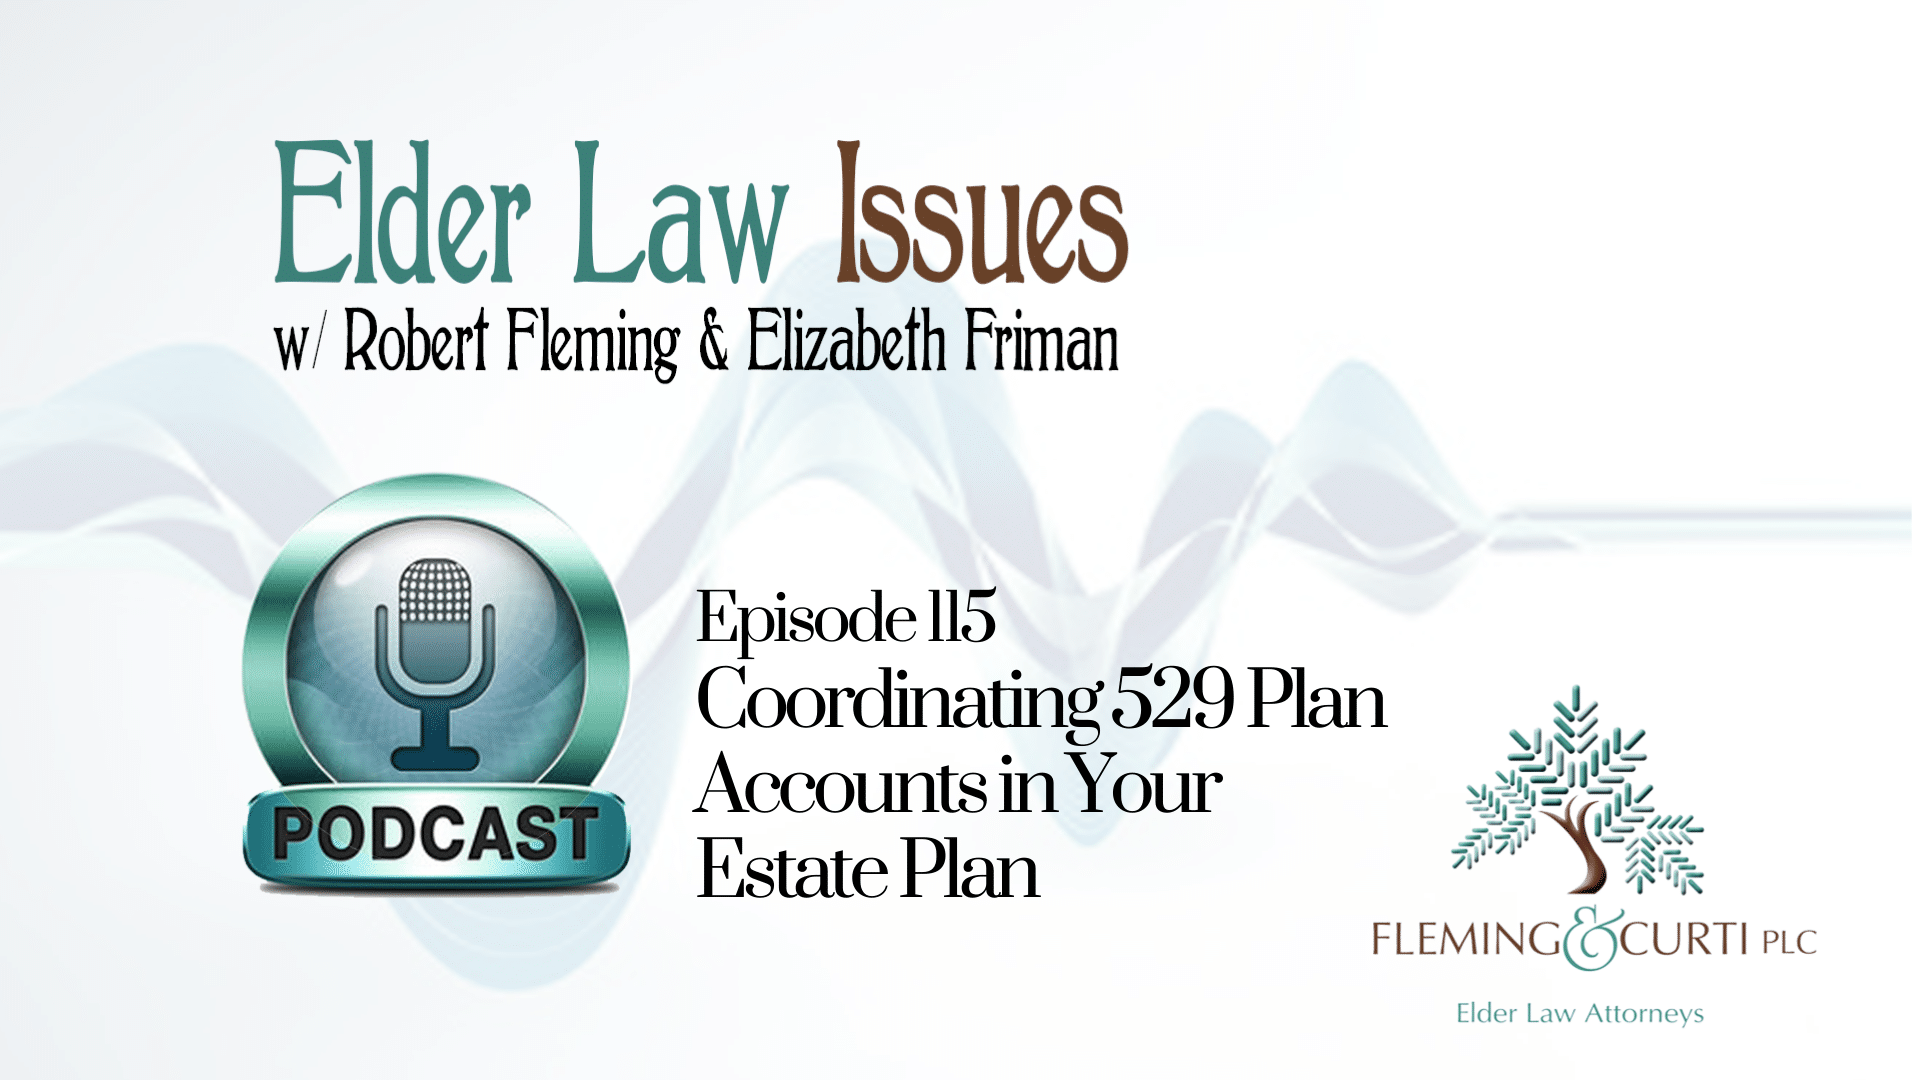 Coordinating 529 Plan Accounts in Your Estate Plan